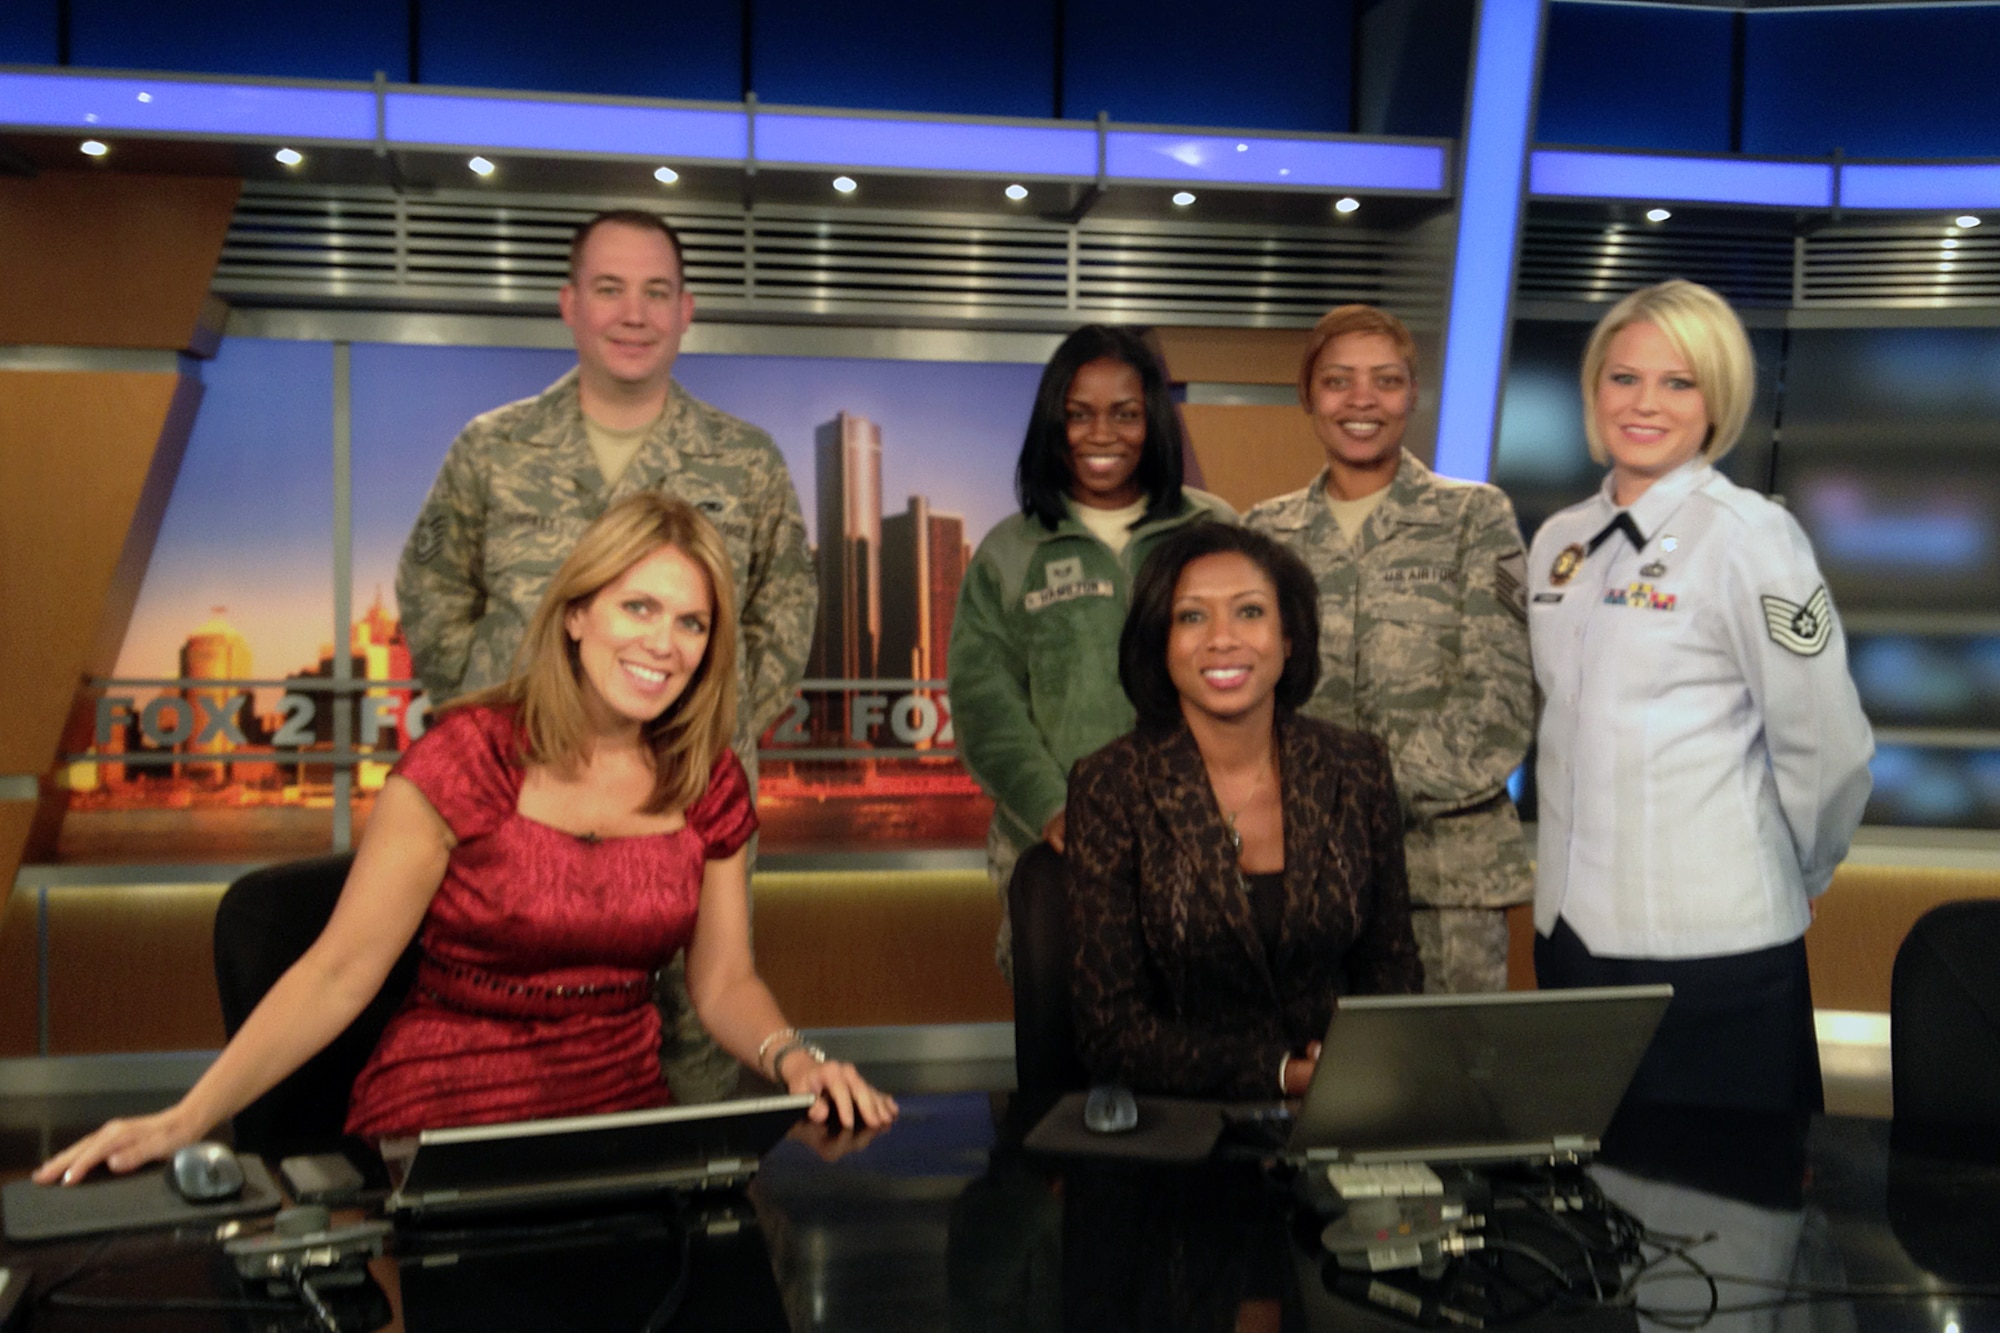 Several members of the 127th Wing Recruiting office at Selfridge Air National Guard Base visited the studios of Fox-2 Detroit on Oct. 16, 2012, to talk about job opportunities that exist in the Air National Guard at Selfridge. With Fox-2 reporters Deena Centofanti and Anqunette Jamison are TSgt. Kevin Shirkey, SSgt. Daquita Hamilton, MSgt. Rebecca El and TSgt. Chandra Corrado, who was interviewed during a live segment about the opportunities that exist in the ANG. (Courtesy photo from Fox-2)